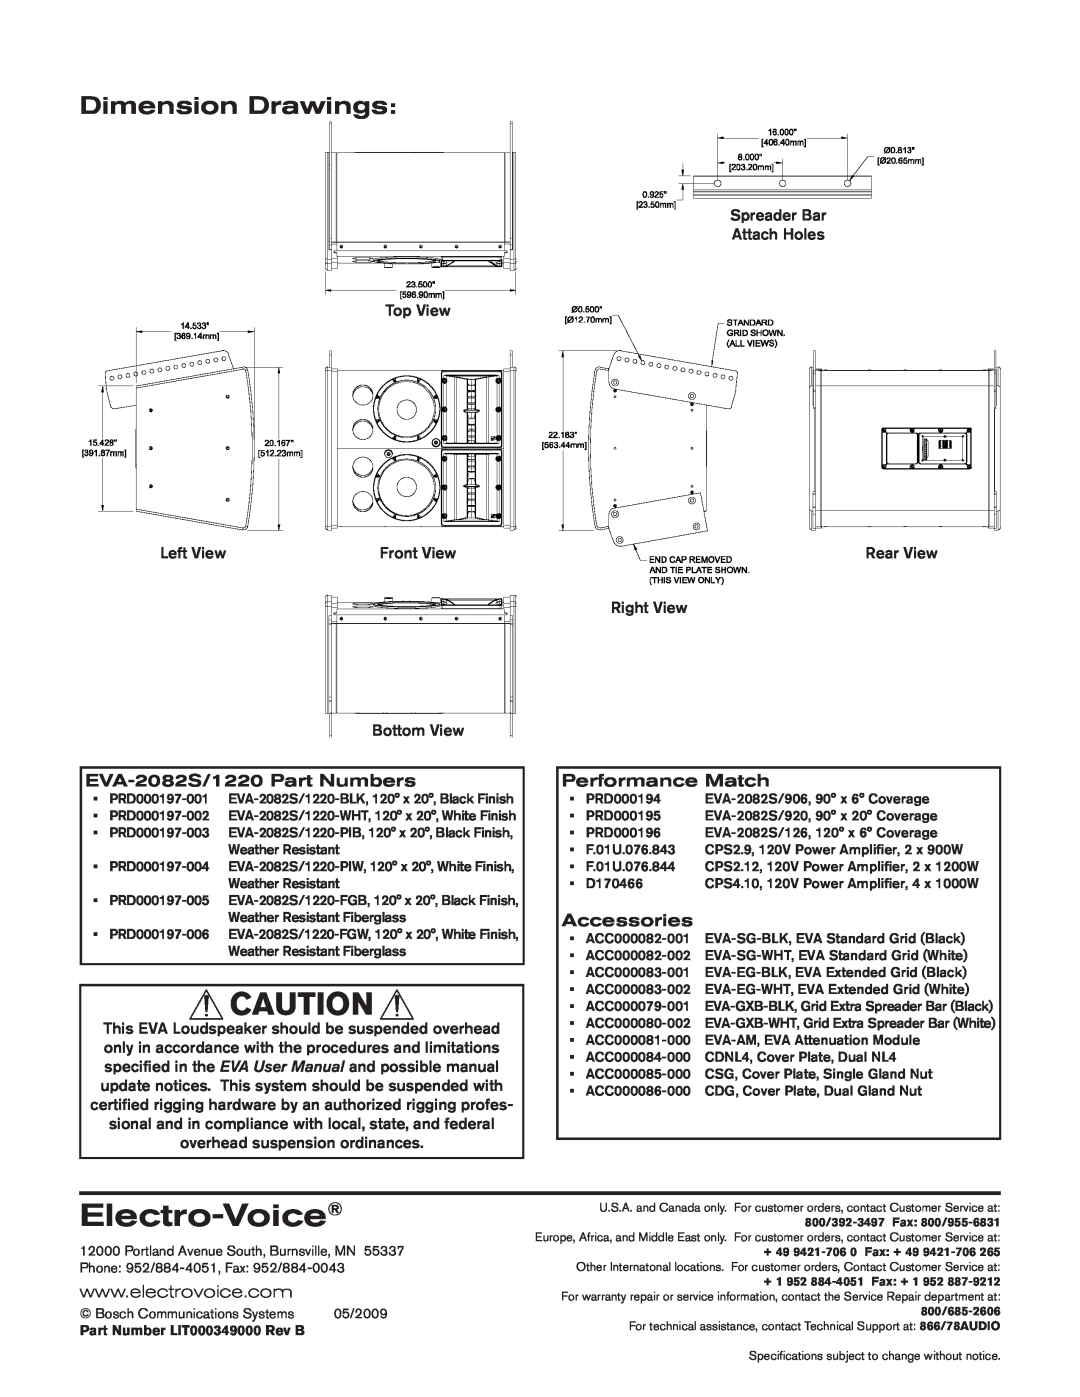 Electro-Voice Dimension Drawings, Electro-Voice, EVA-2082S/1220Part Numbers, Performance Match, Accessories, Top View 